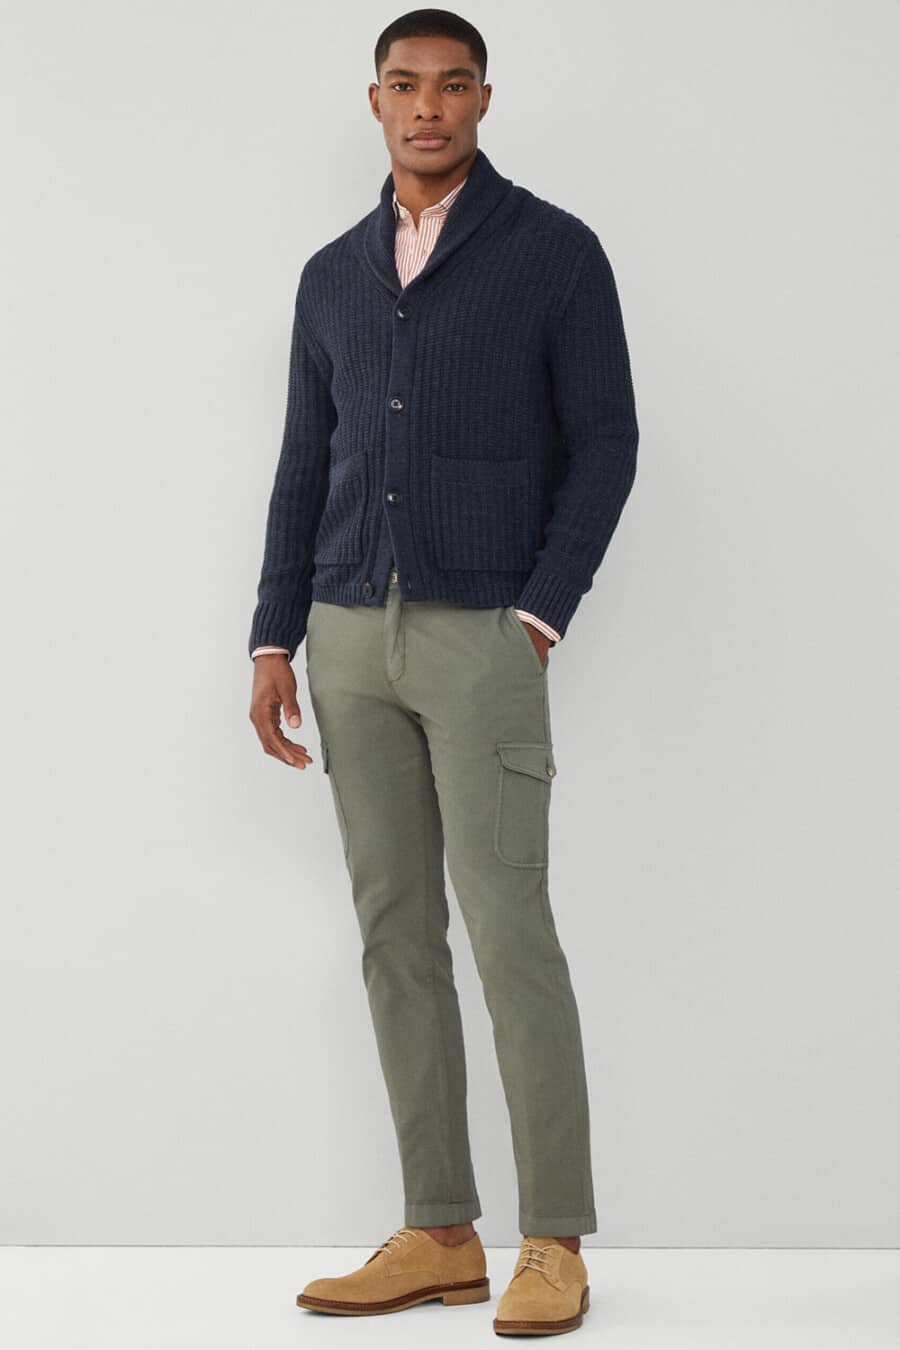 Men's green cargo pants, red/white stripe shirt, navy shawl collar cardigan and tan orange suede shoes worn sockless smart-casual outfit